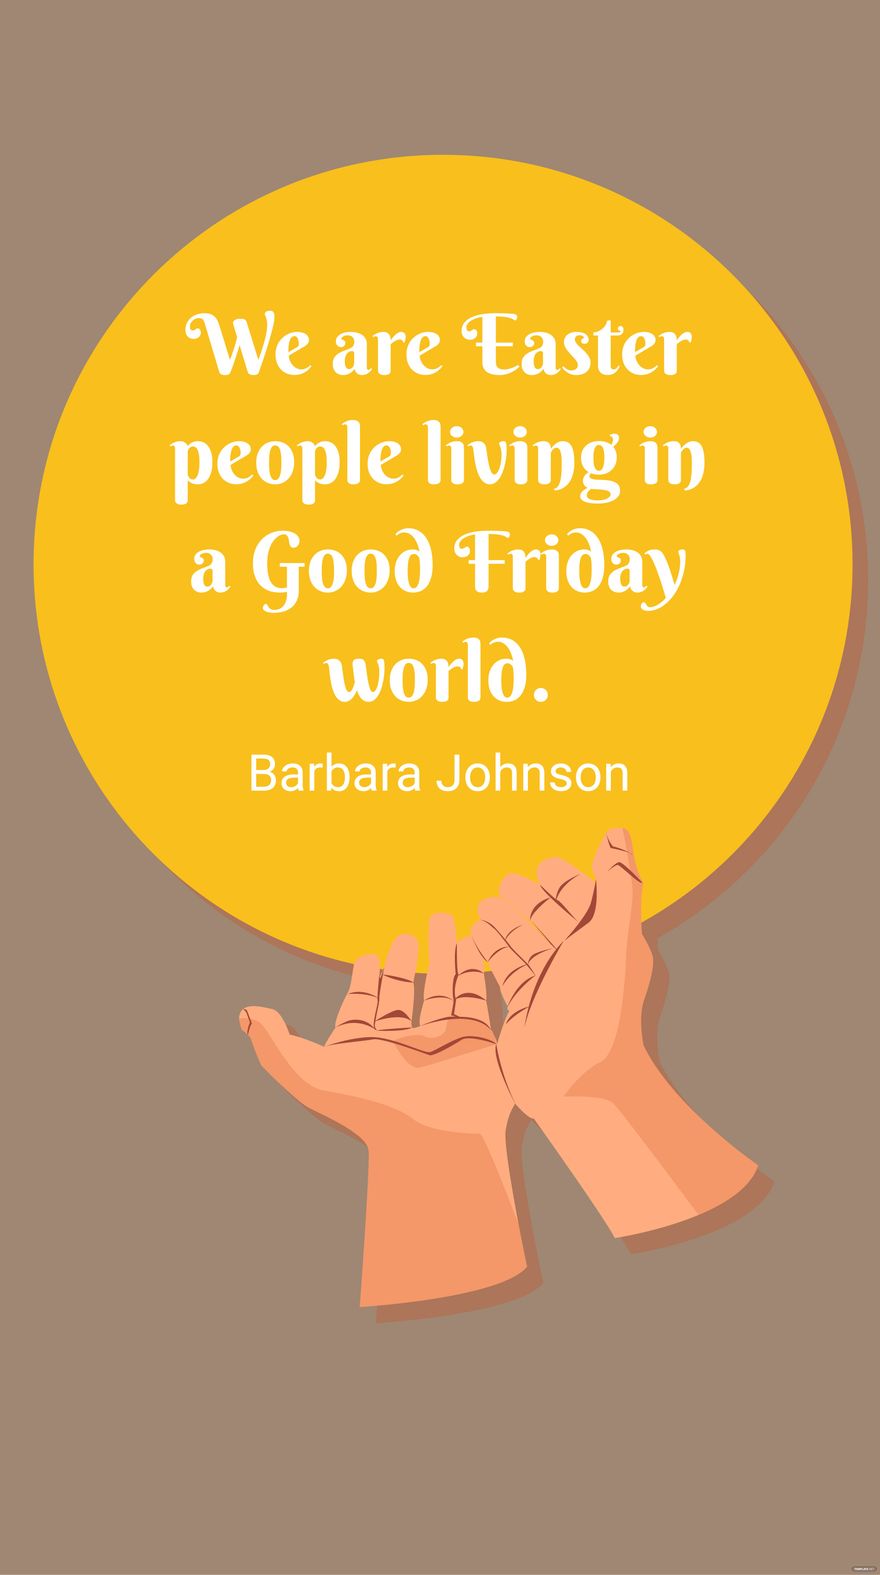 Free Barbara Johnson - We are Easter people living in a Good Friday world.